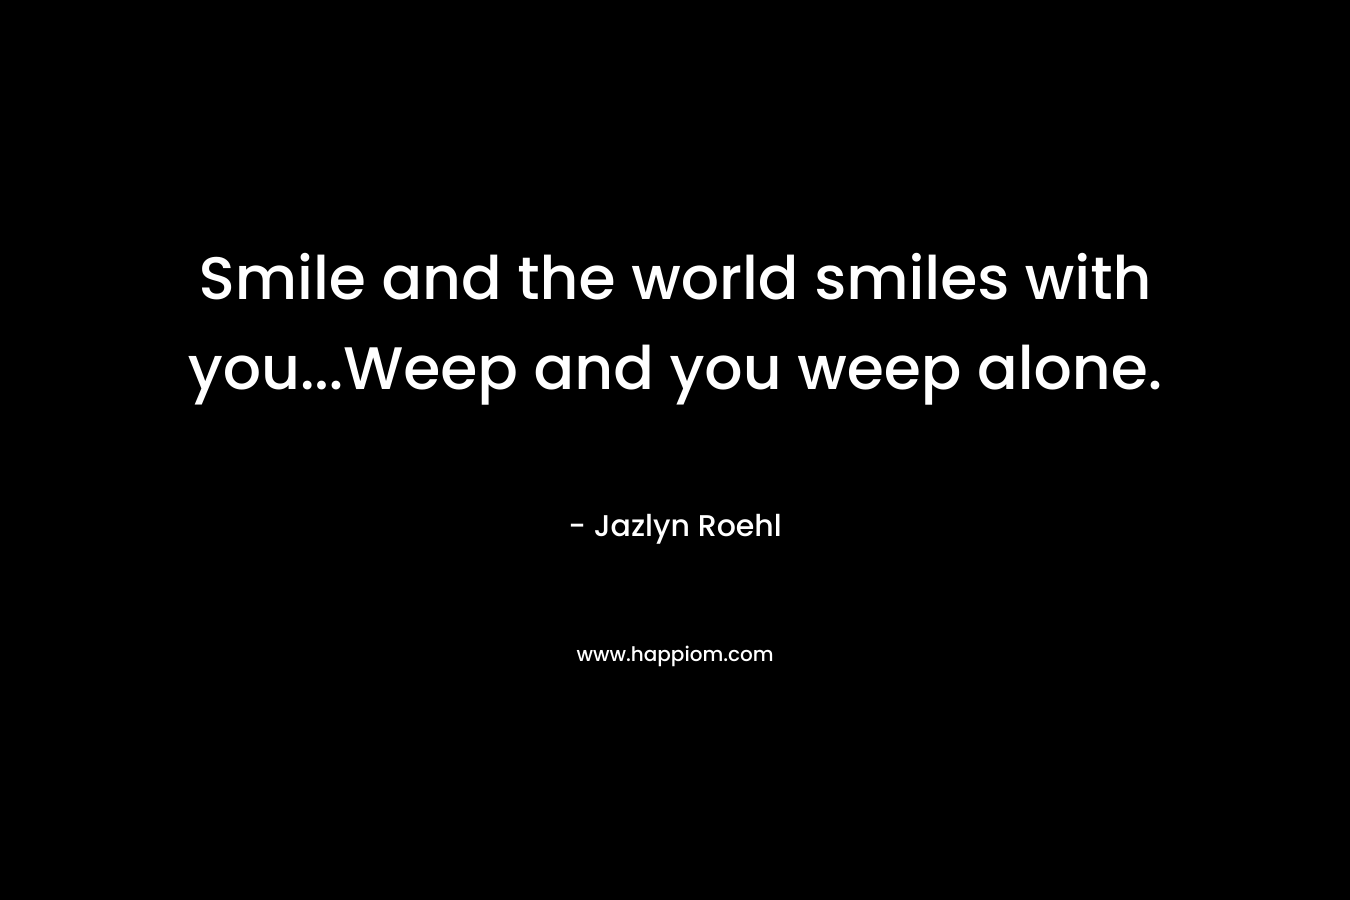 Smile and the world smiles with you…Weep and you weep alone. – Jazlyn Roehl